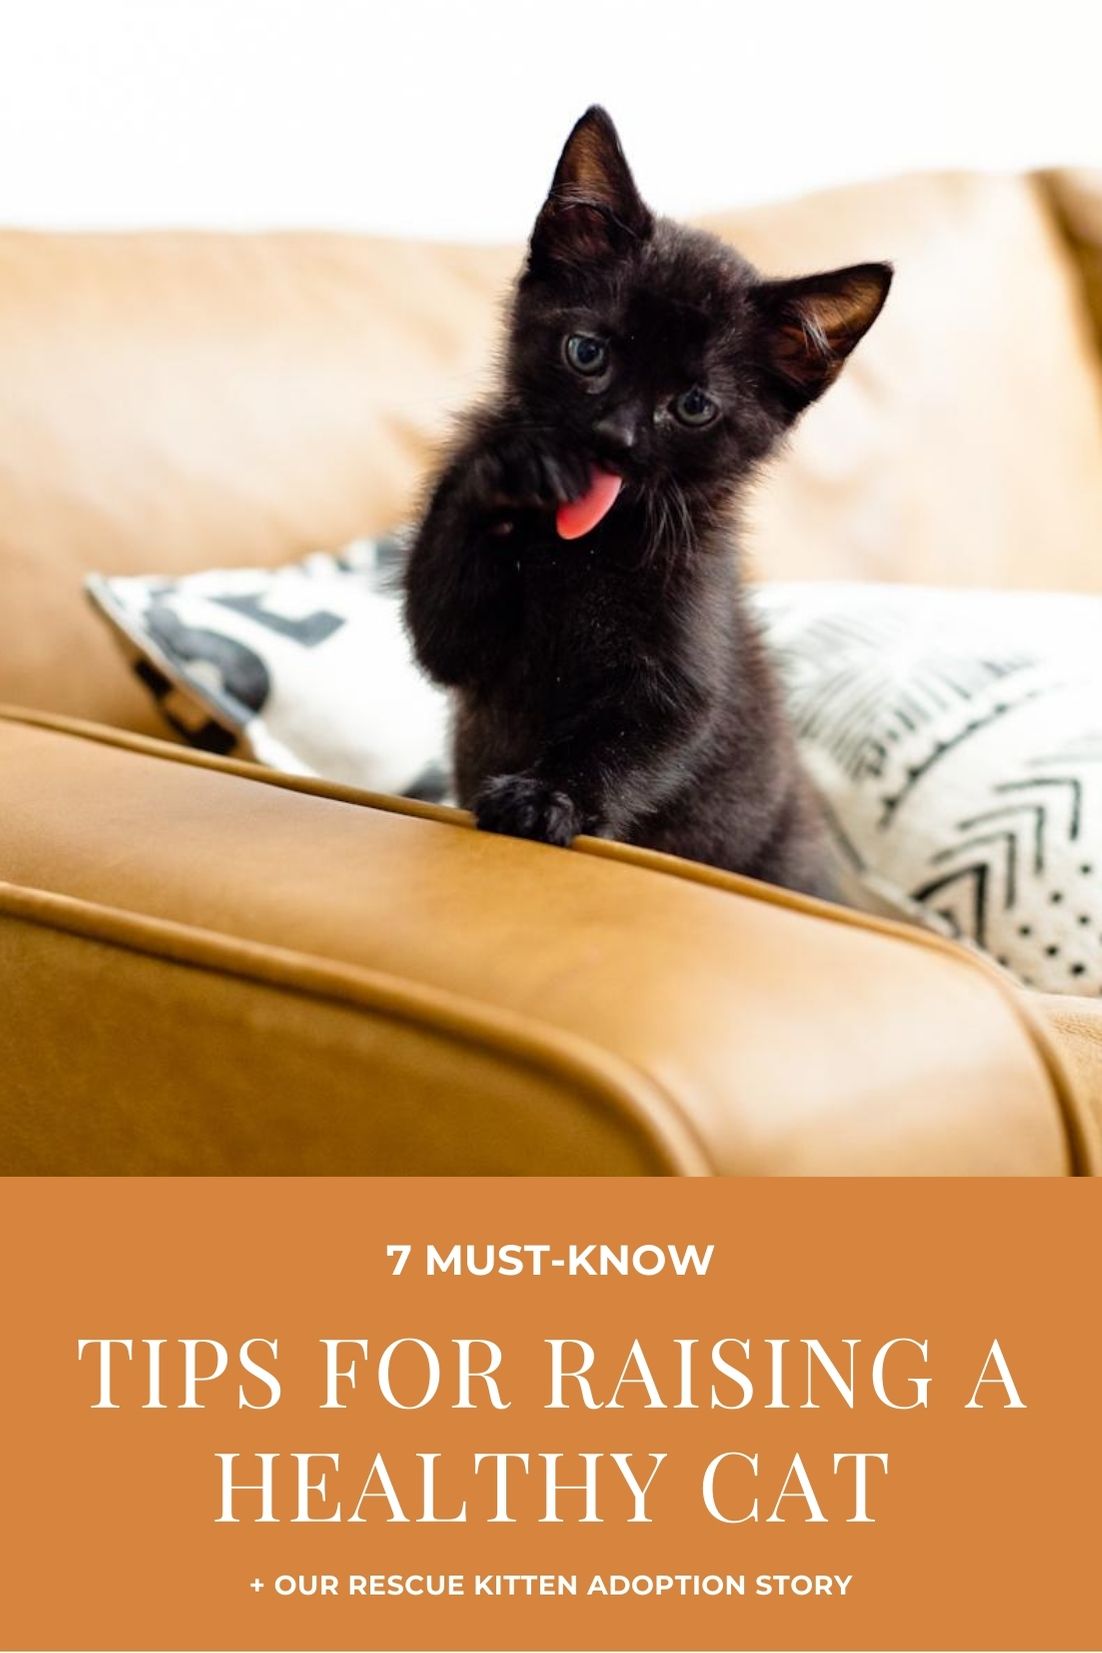 7 Must-Know Tips for Raising a Healthy Cat + Our Rescue Kitten Adoption Story | Solid Gold by popular Florida lifestyle blog, Fresh Mommy Blog: image of a black kitten on a couch.